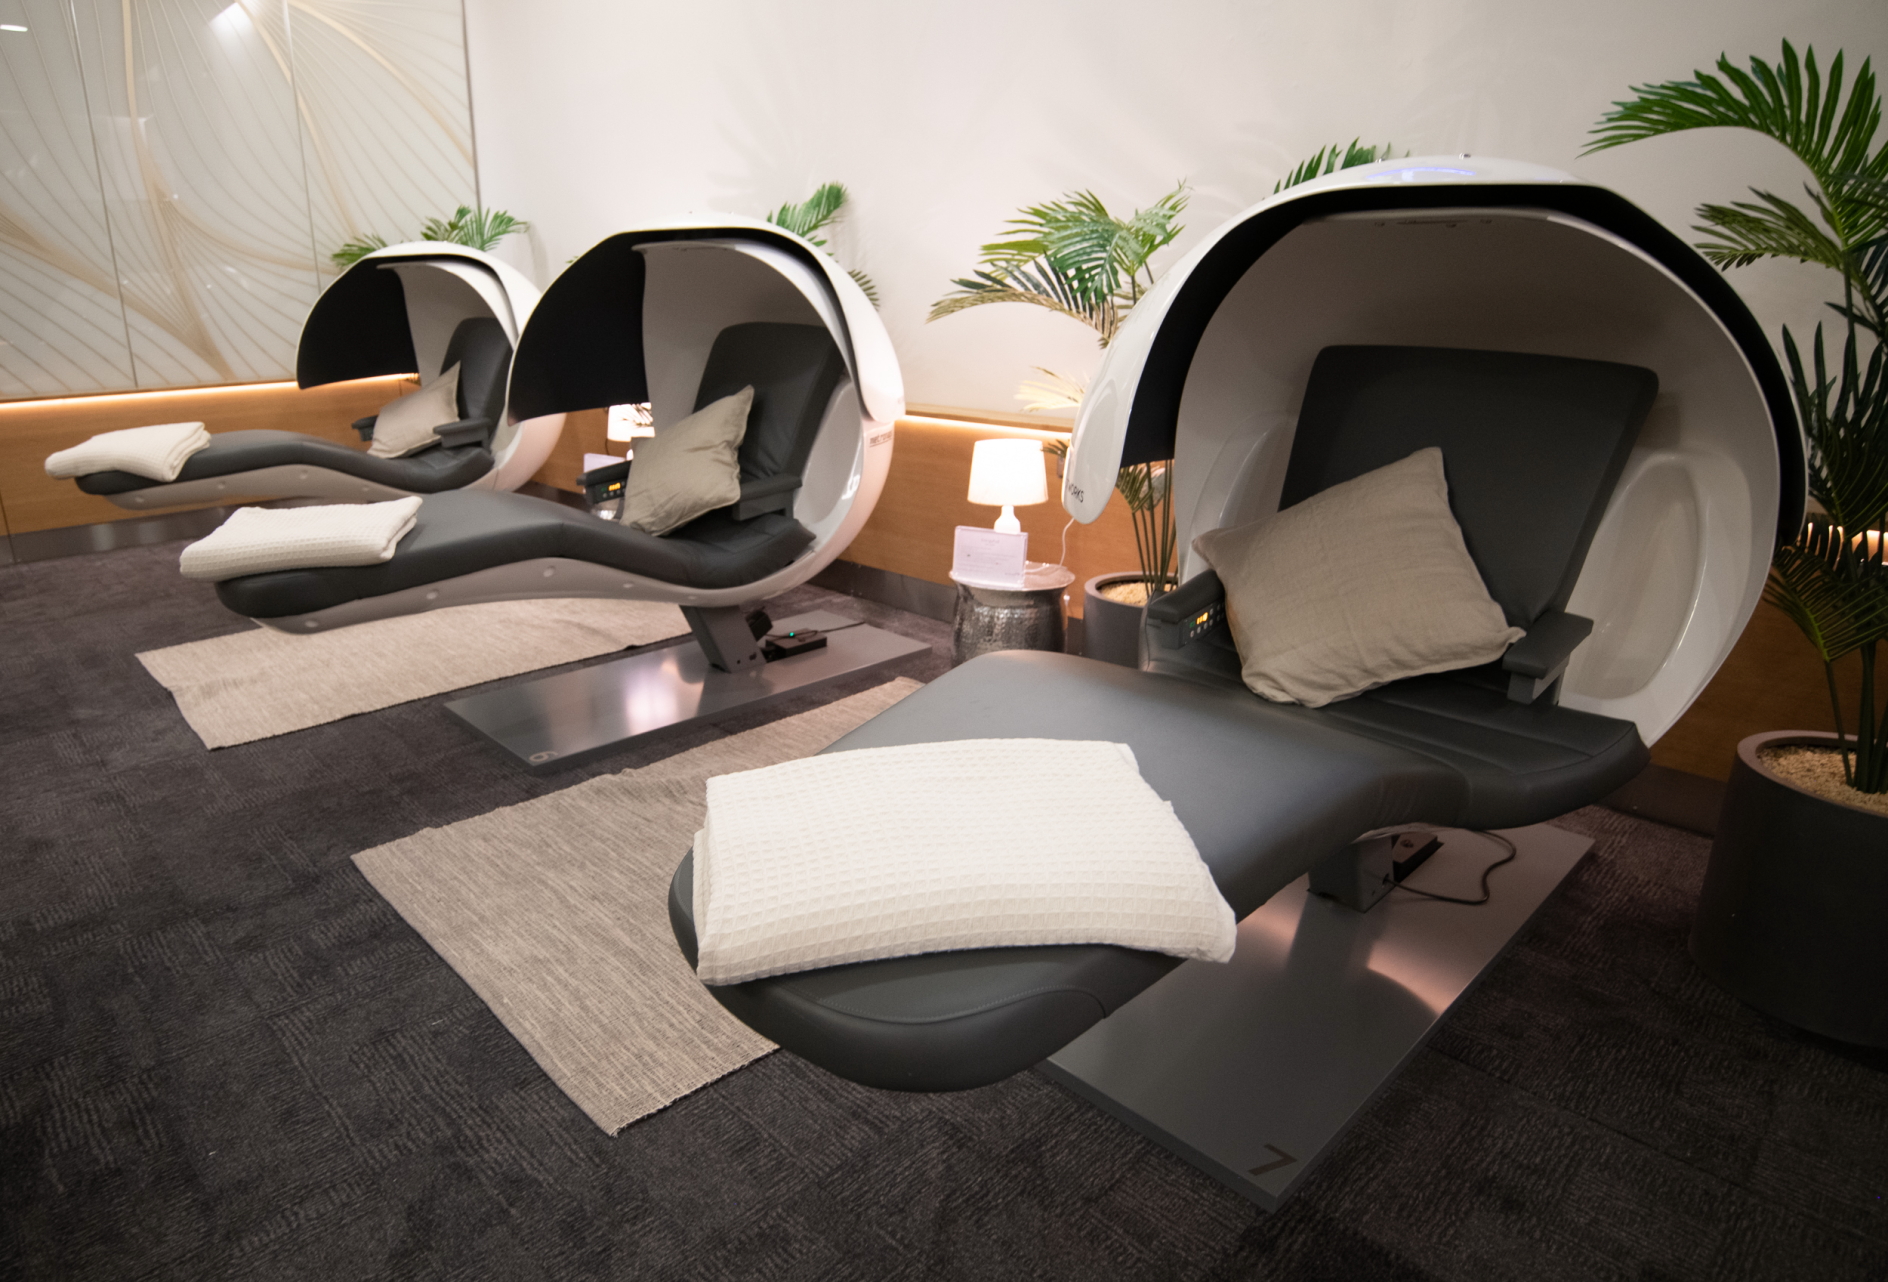 British Airways has expanded its First Lounge at London Heathrow with a ‘Forty Winks’ nap lounge featuring EnergyPods. Introduced in partnership with Restworks, the EnergyPods allow customers in need of some pre-flight shuteye to power nap.. Click to enlarge.